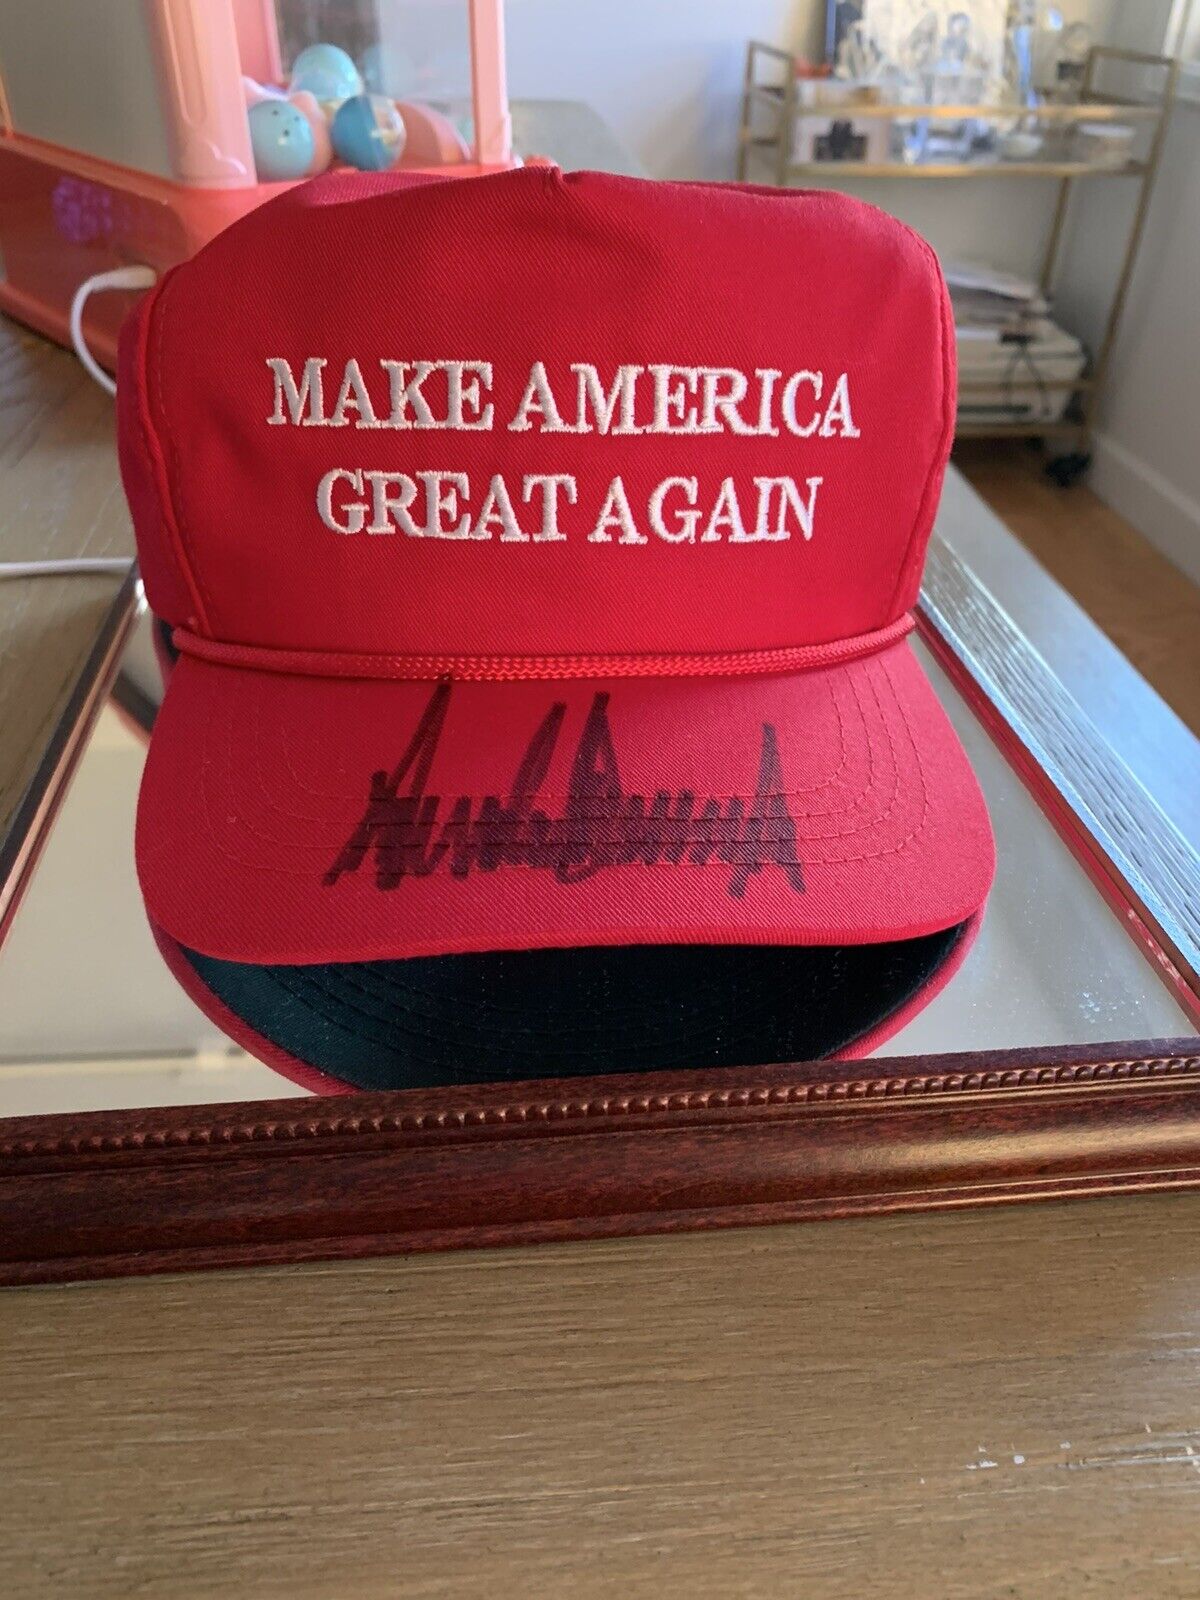 President DONALD TRUMP Autographed MAGA Hat “MAKE AMERICA GREAT AGAIN” BRAND NEW